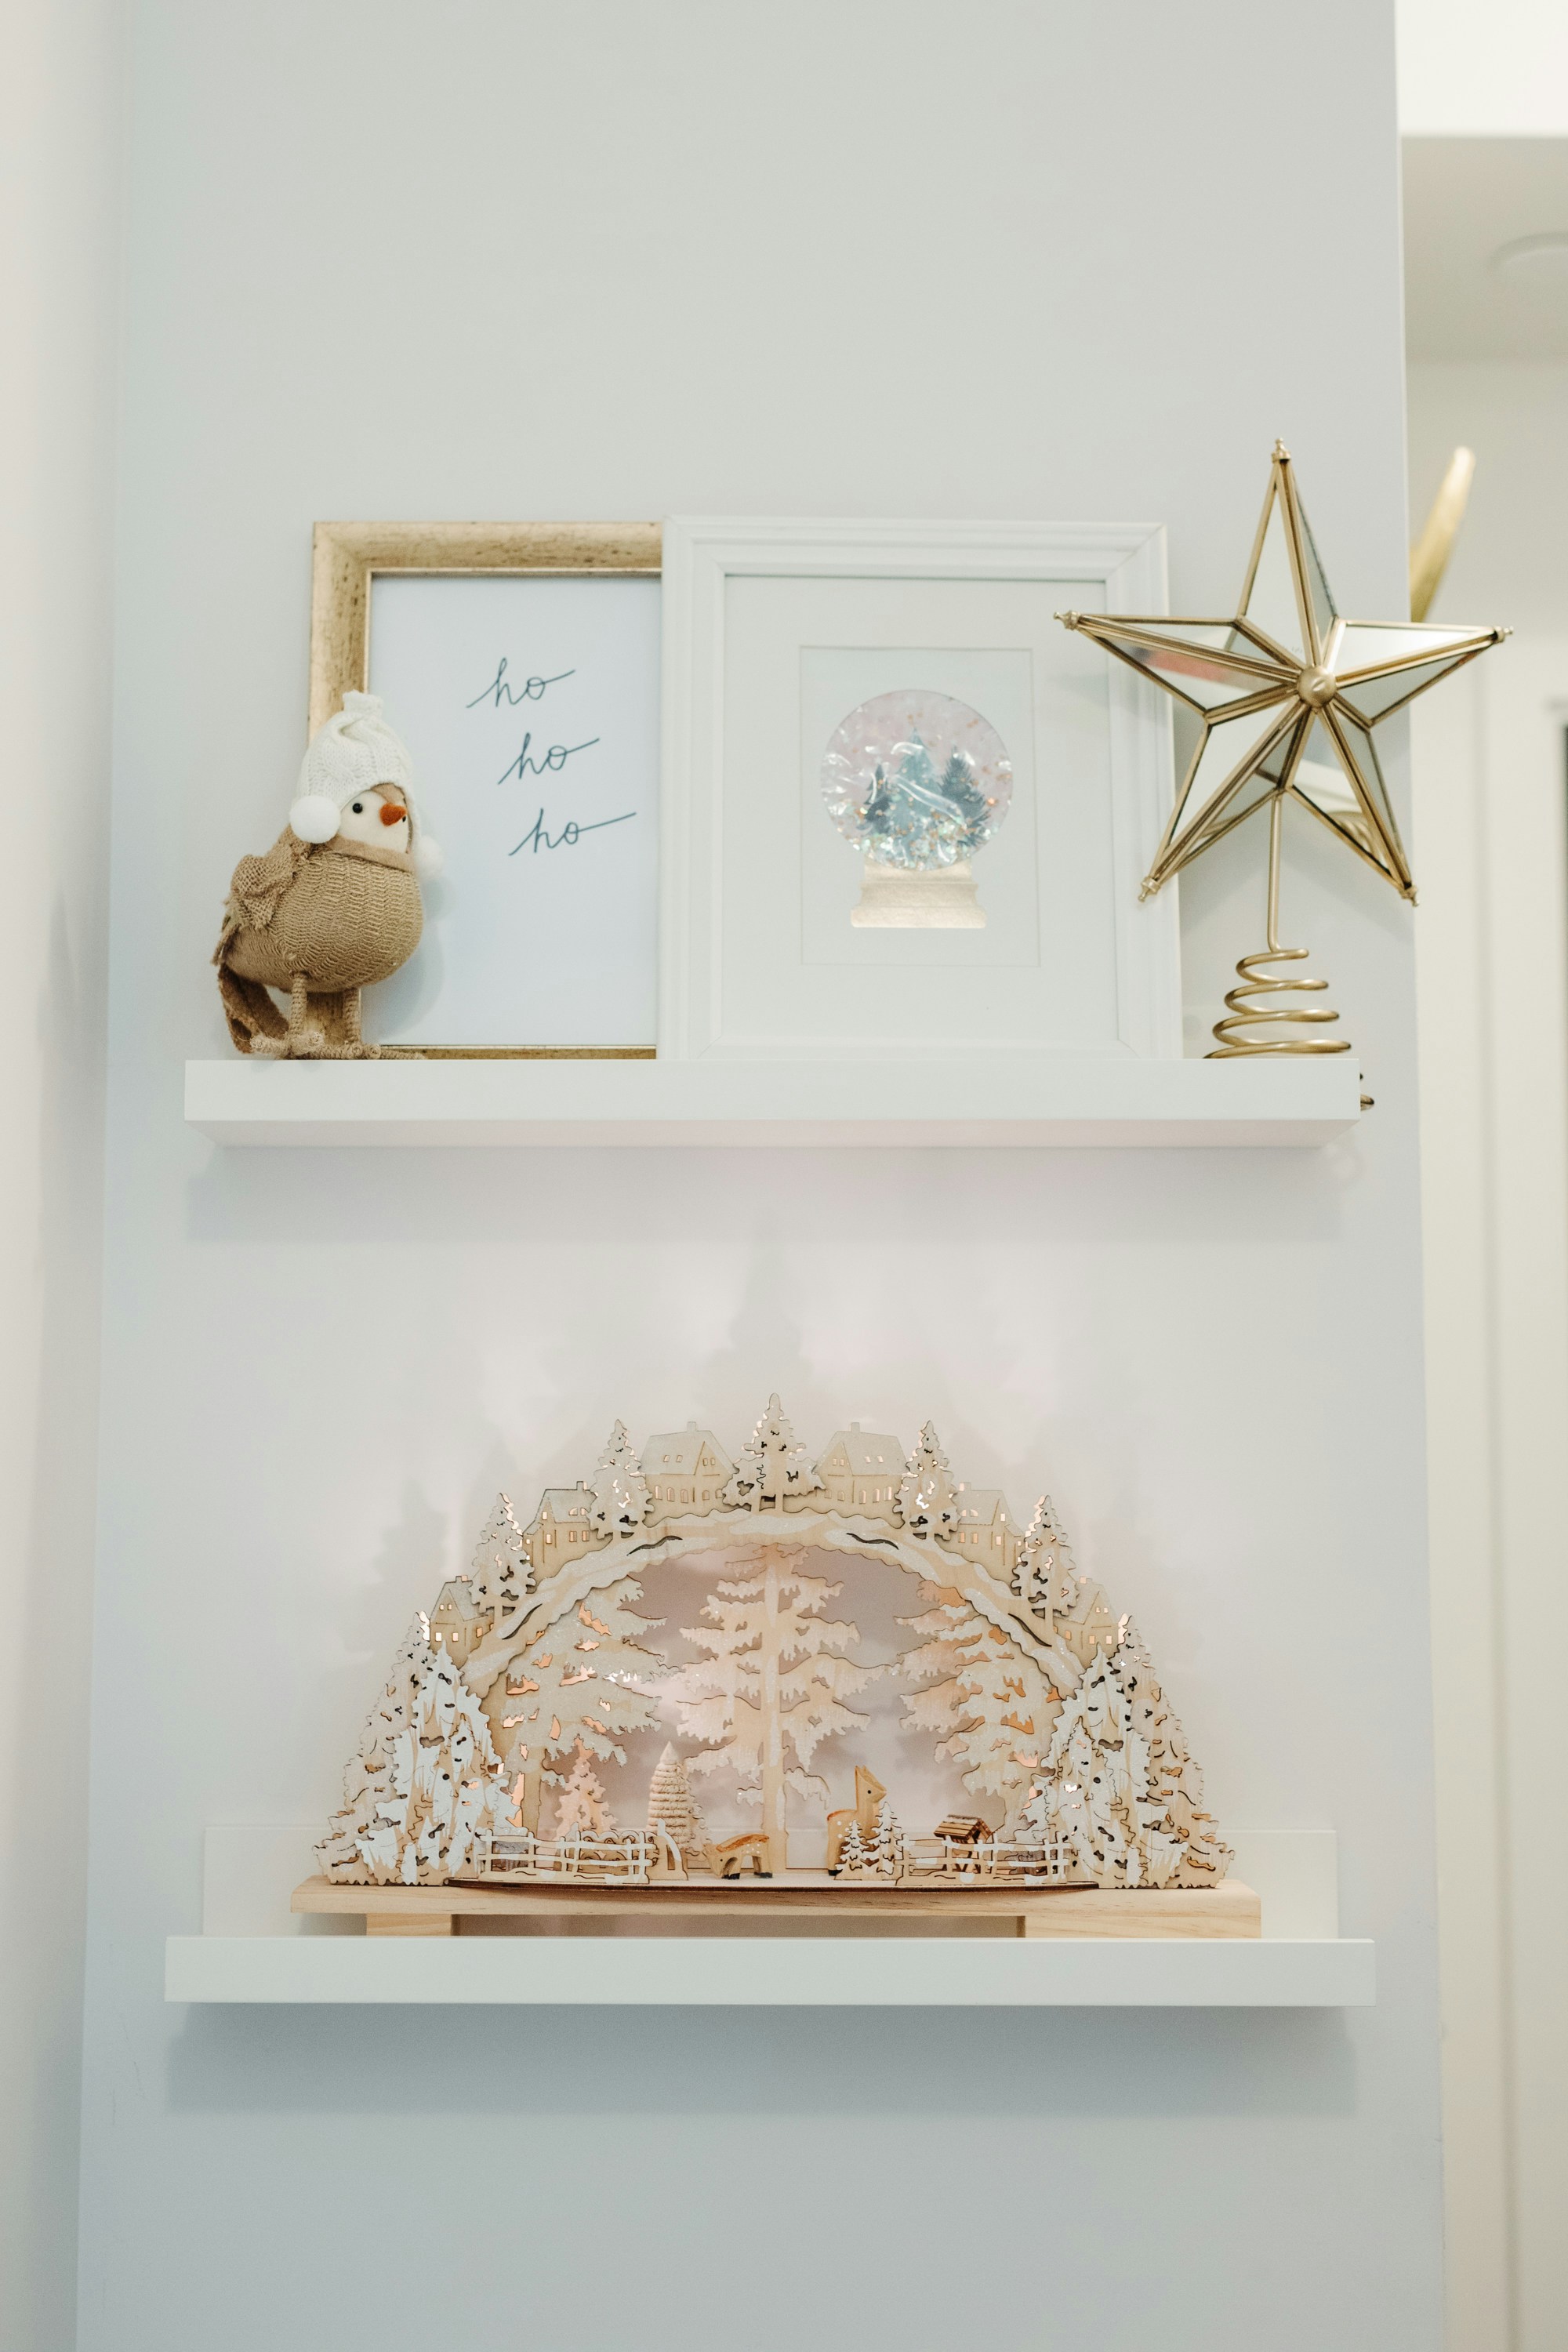 Redecorate your picture ledges with festive Christmas accessories, including a show-stopping wood winterland scene.